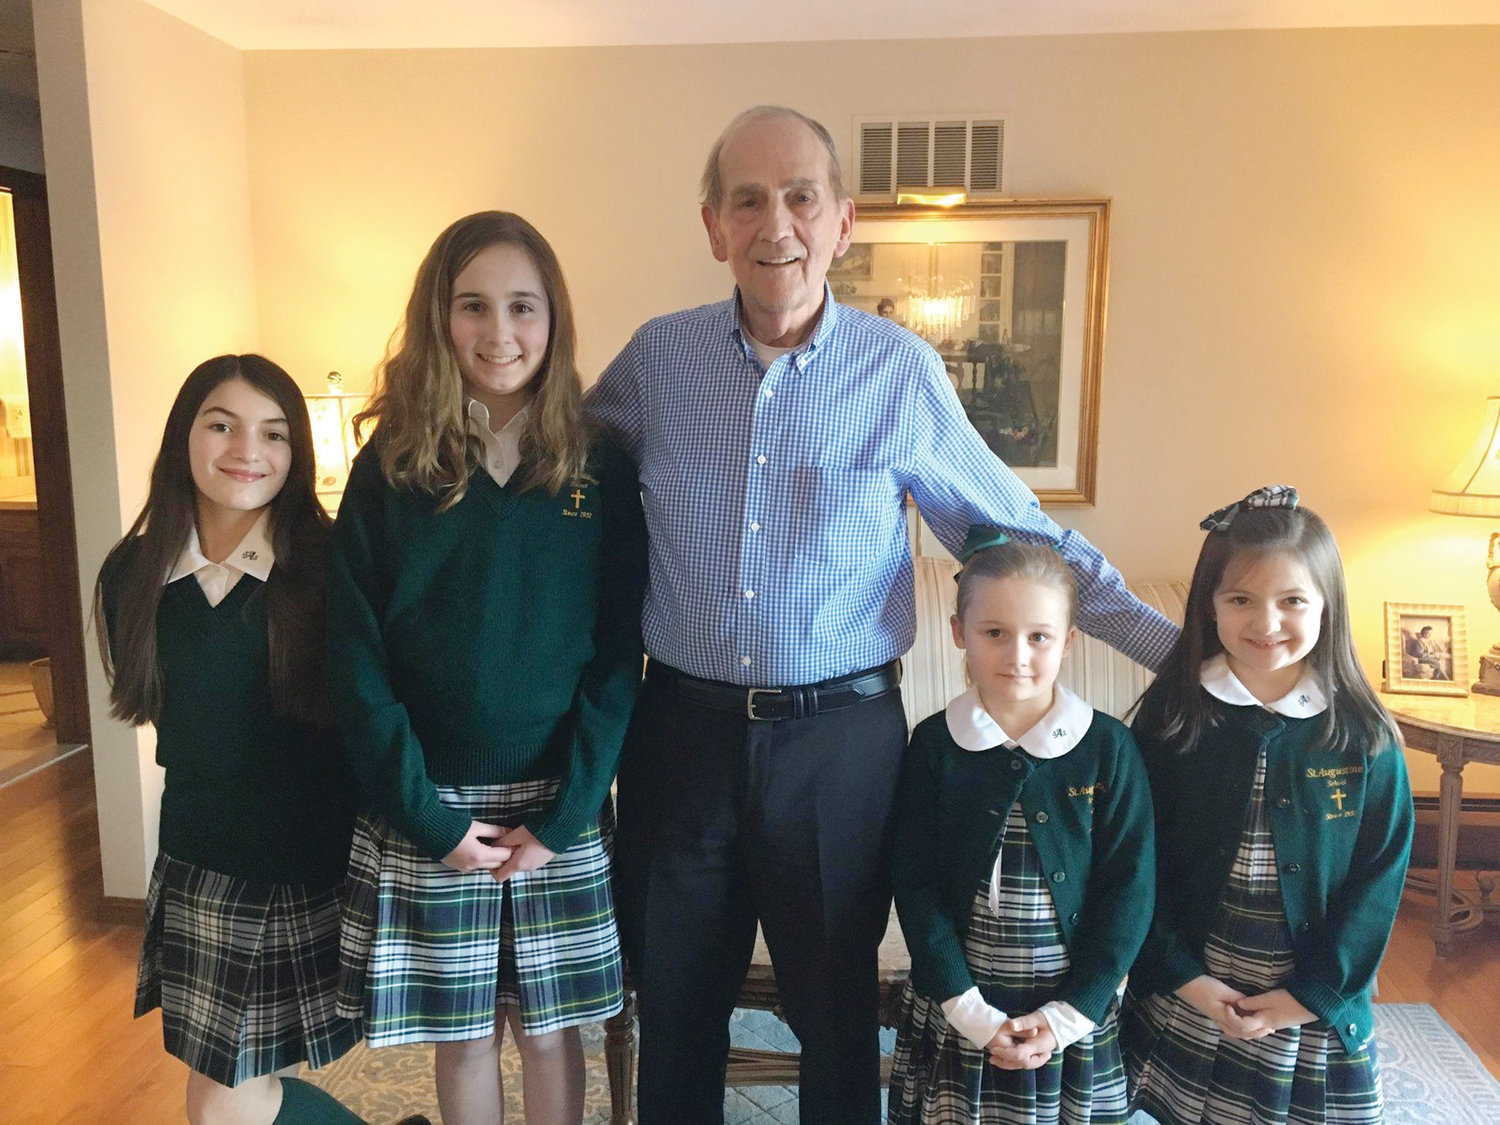 Pictured, from left, students Kiely DeQuattro, Elyse Brassard, Lila Schaumburg and Cambria DeQuattro with W. Albert Martin.